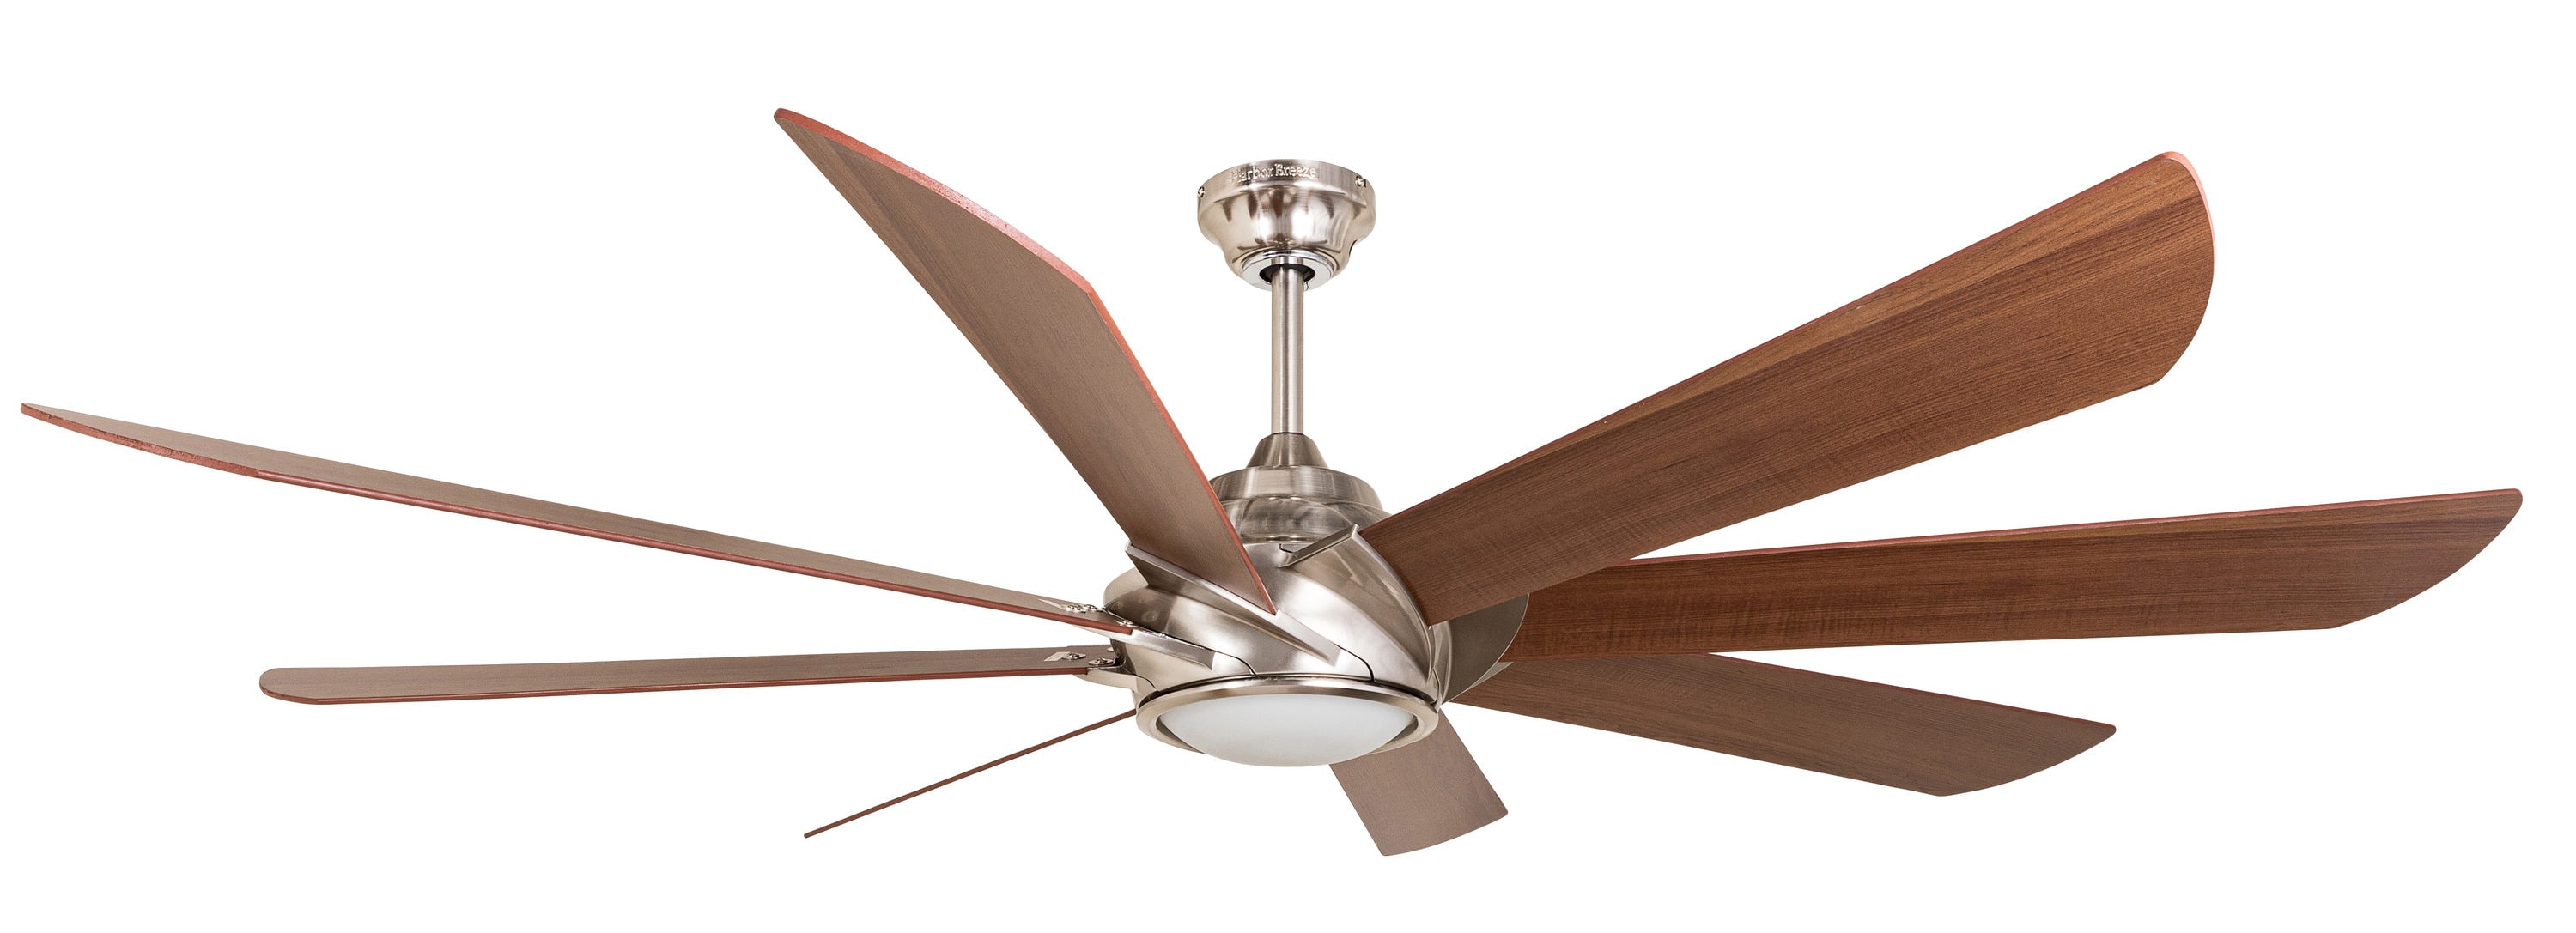 Harbor Breeze Hydra 70" Indoor Ceiling Fan with Light & Remote Control Brushed Nickel for sale online 